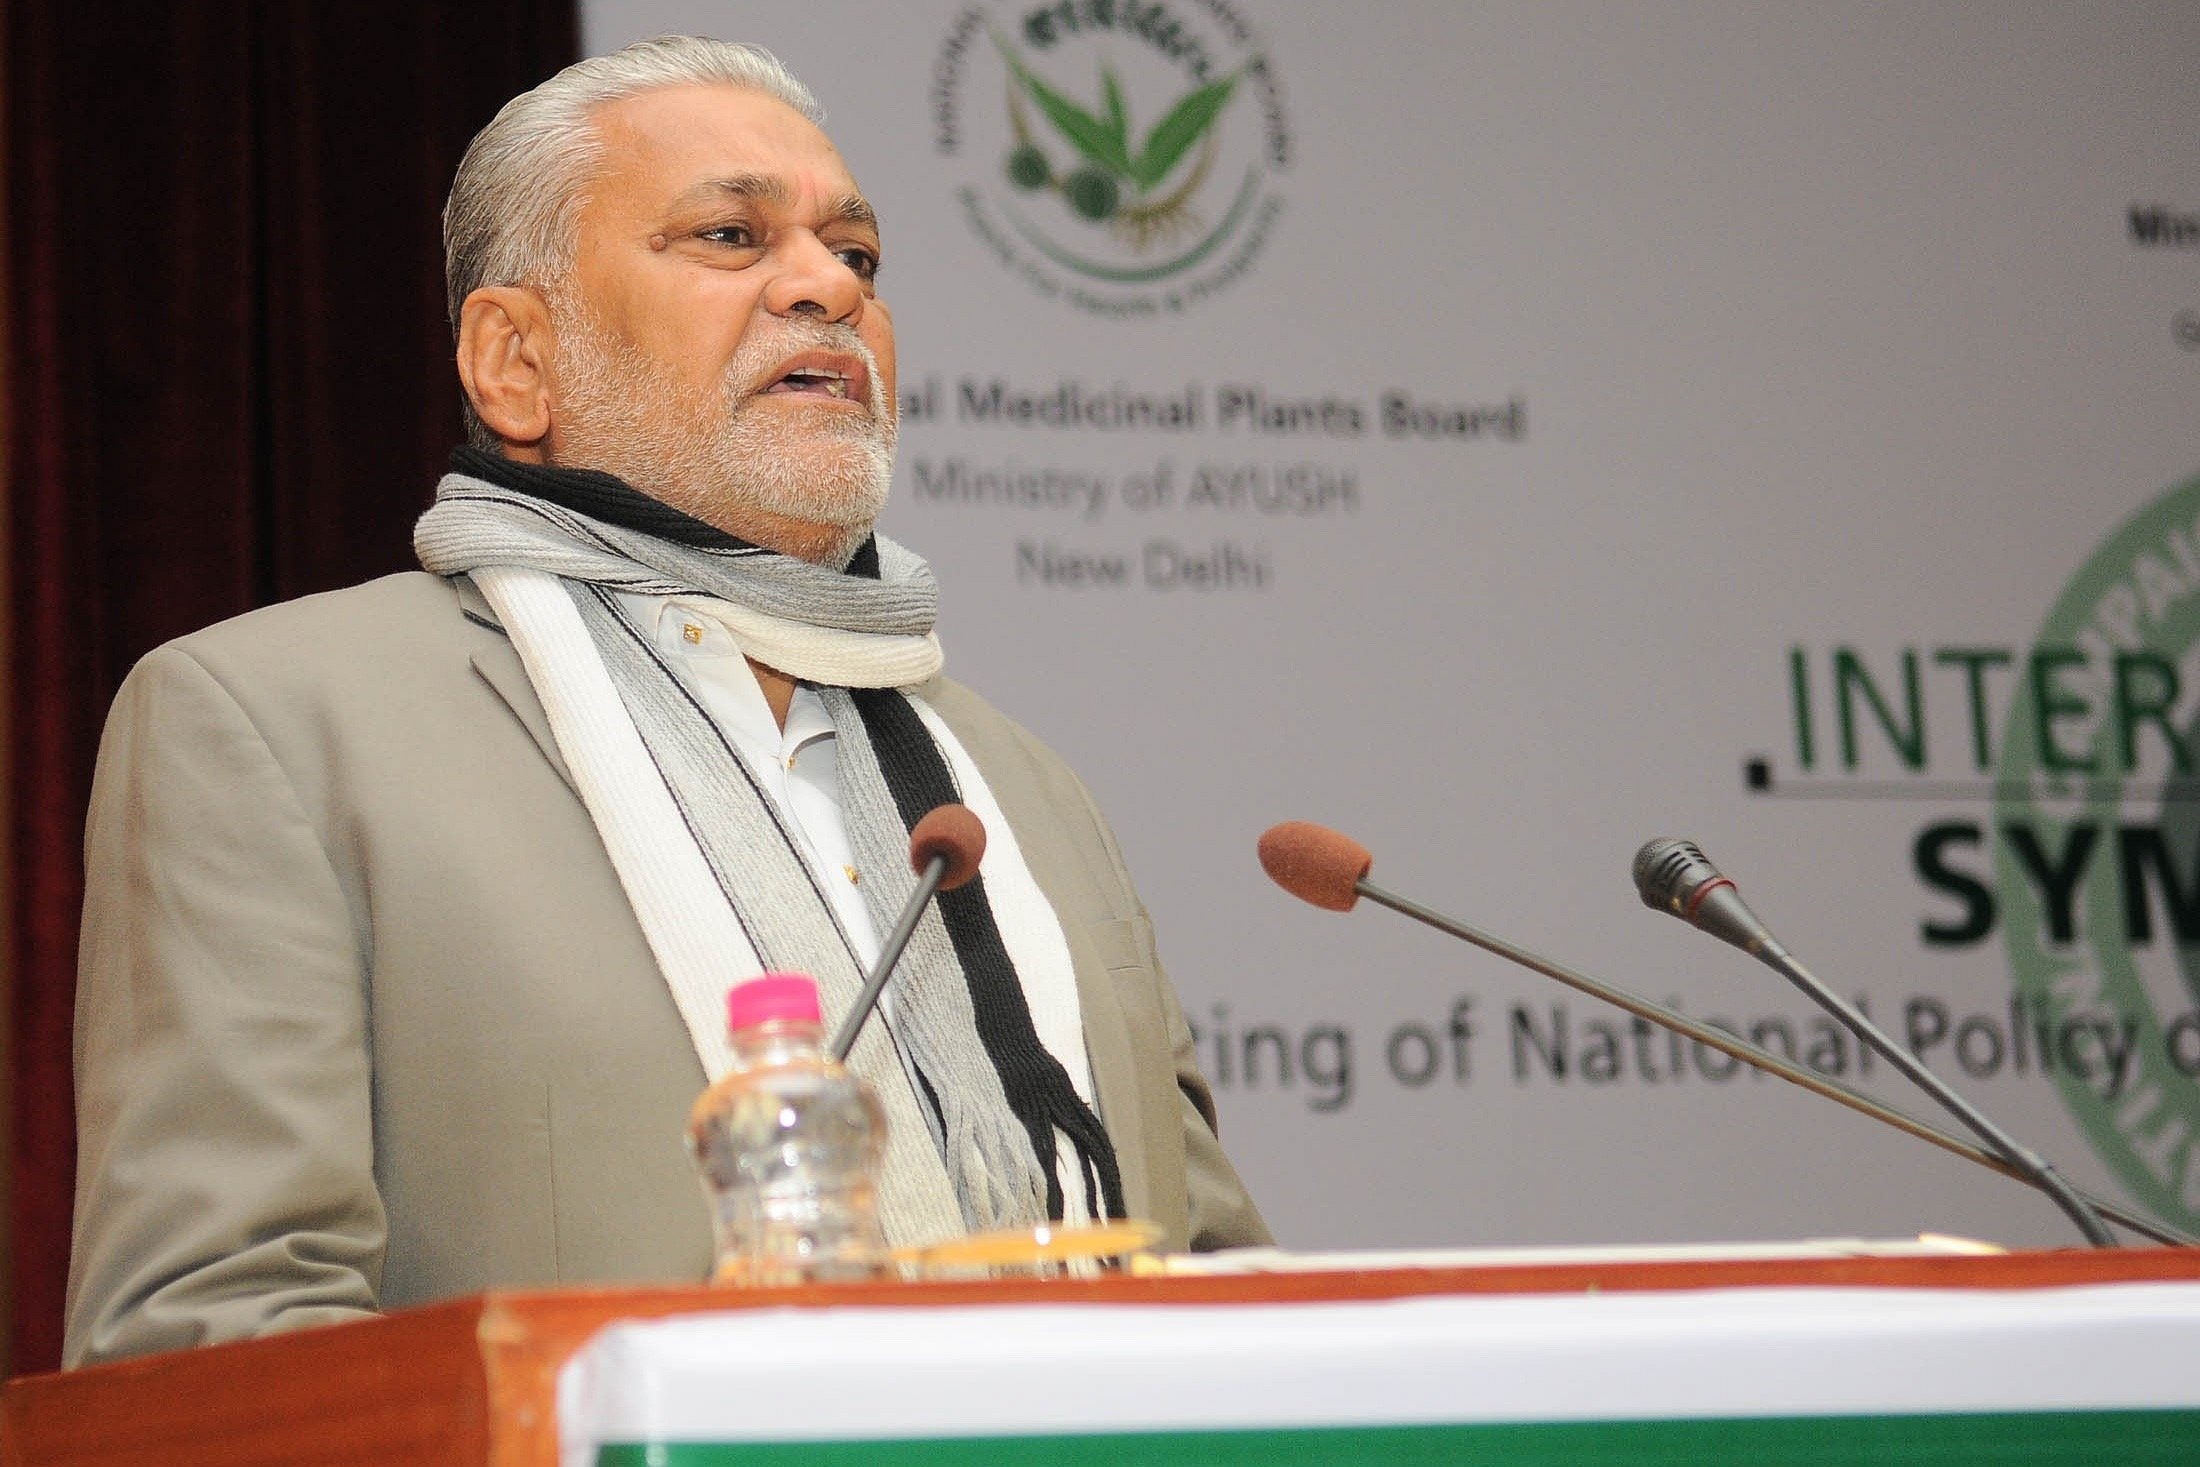 Union Minister of State for Agriculture Parshottam Rupala. (pic via Twitter)